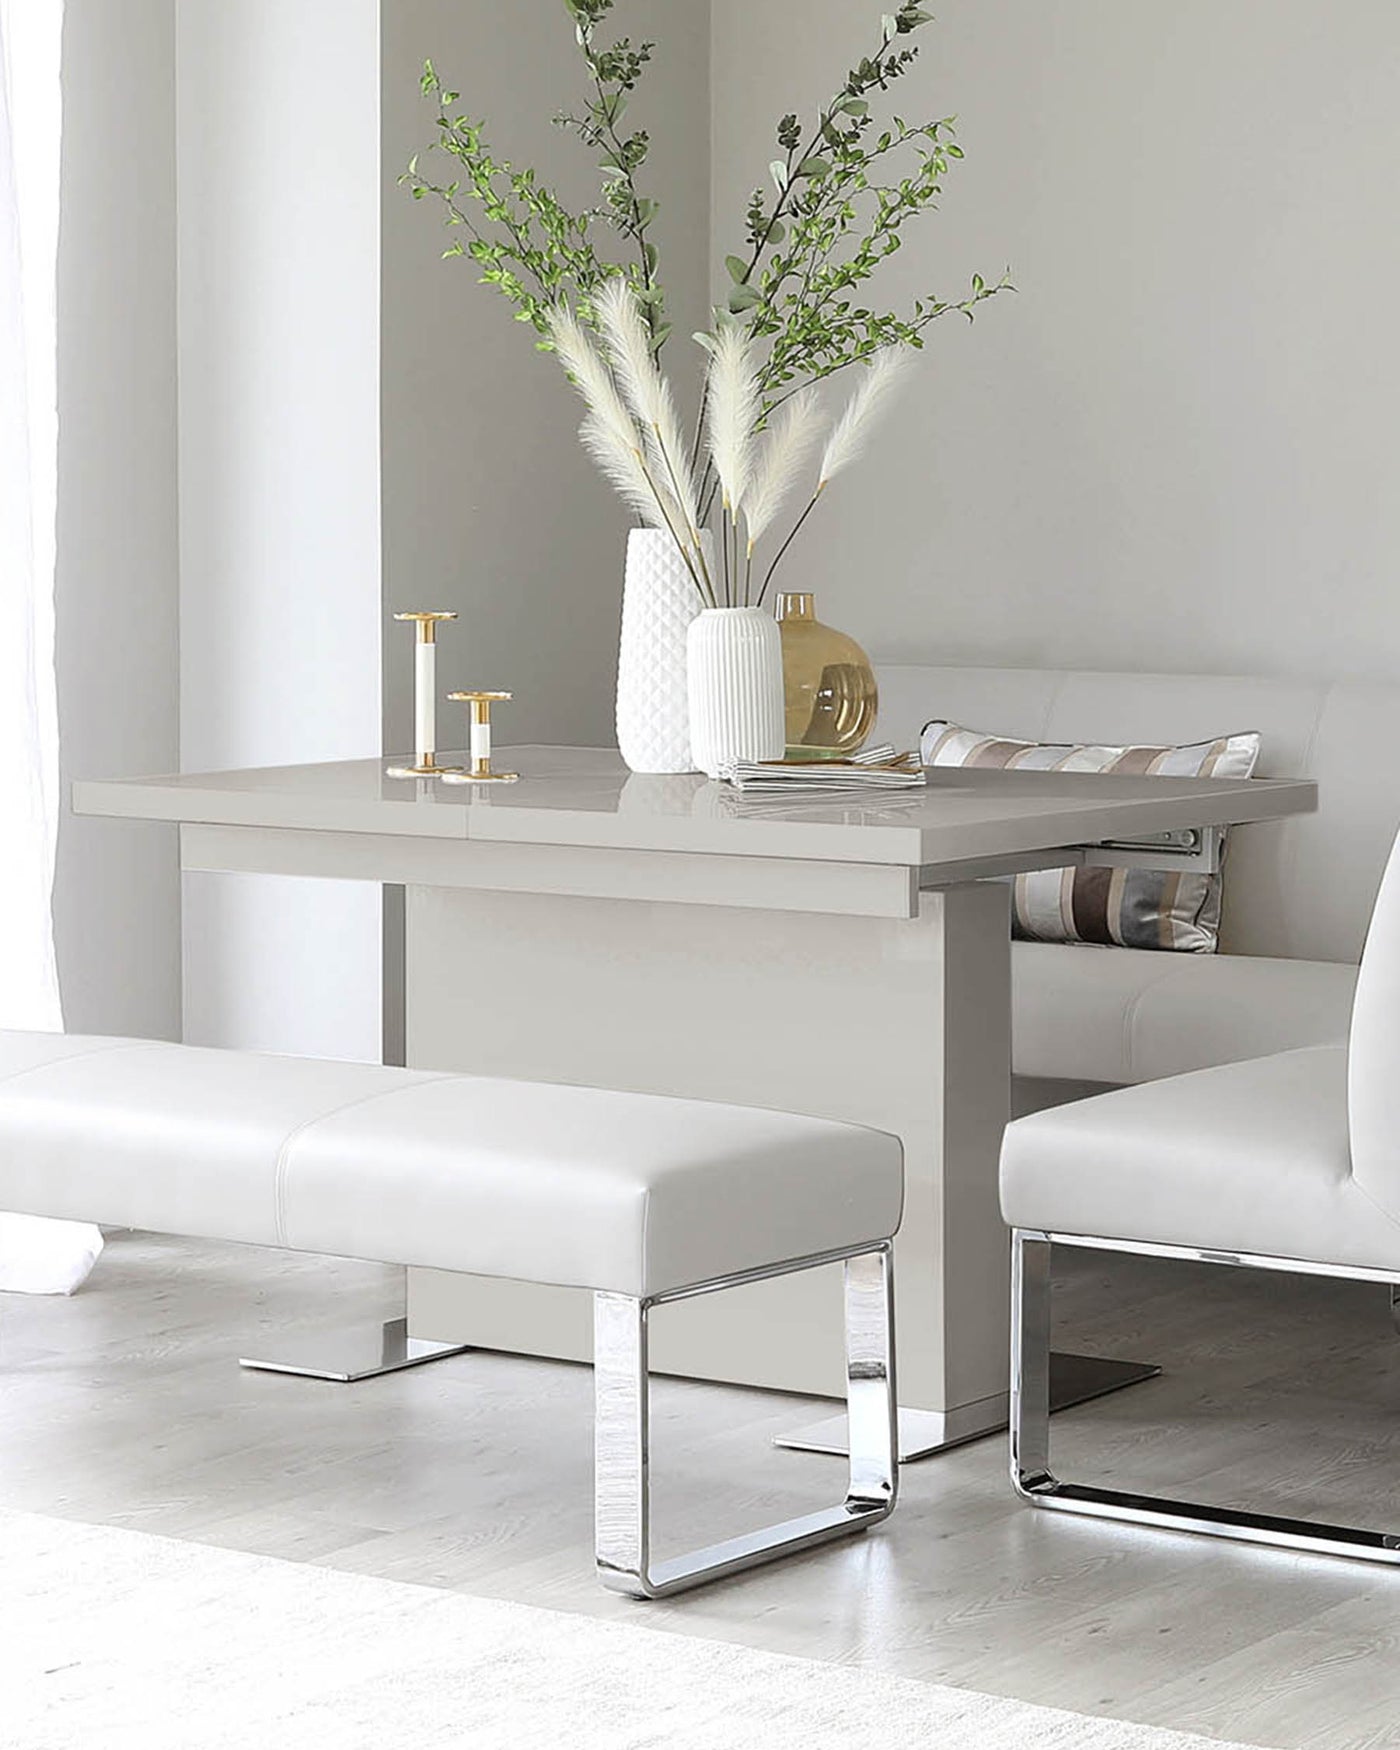 Modern minimalist furniture in a neutral palette, featuring a sleek white rectangular dining table with a clean-lined design, complemented by two elegant white benches. Each bench has a padded seat for comfort and is supported by a striking chrome base that gives a contemporary touch to the ensemble. The scene is subtly decorated with a textured white vase containing pampas grass, golden decorative objects, and a stack of magazines, creating a sophisticated and inviting atmosphere.